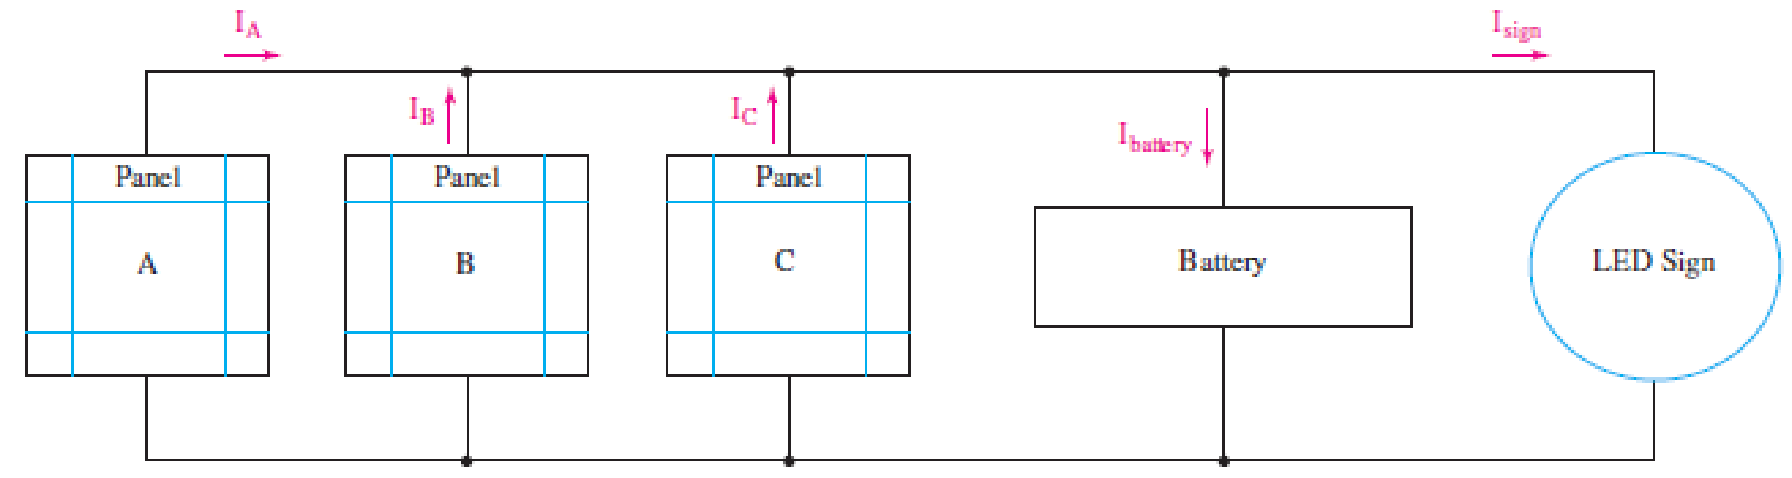 Chapter 3, Problem 10E, The circuit of Fig. 3.53 represents a system comprised of an LED sign powered by a combination of 